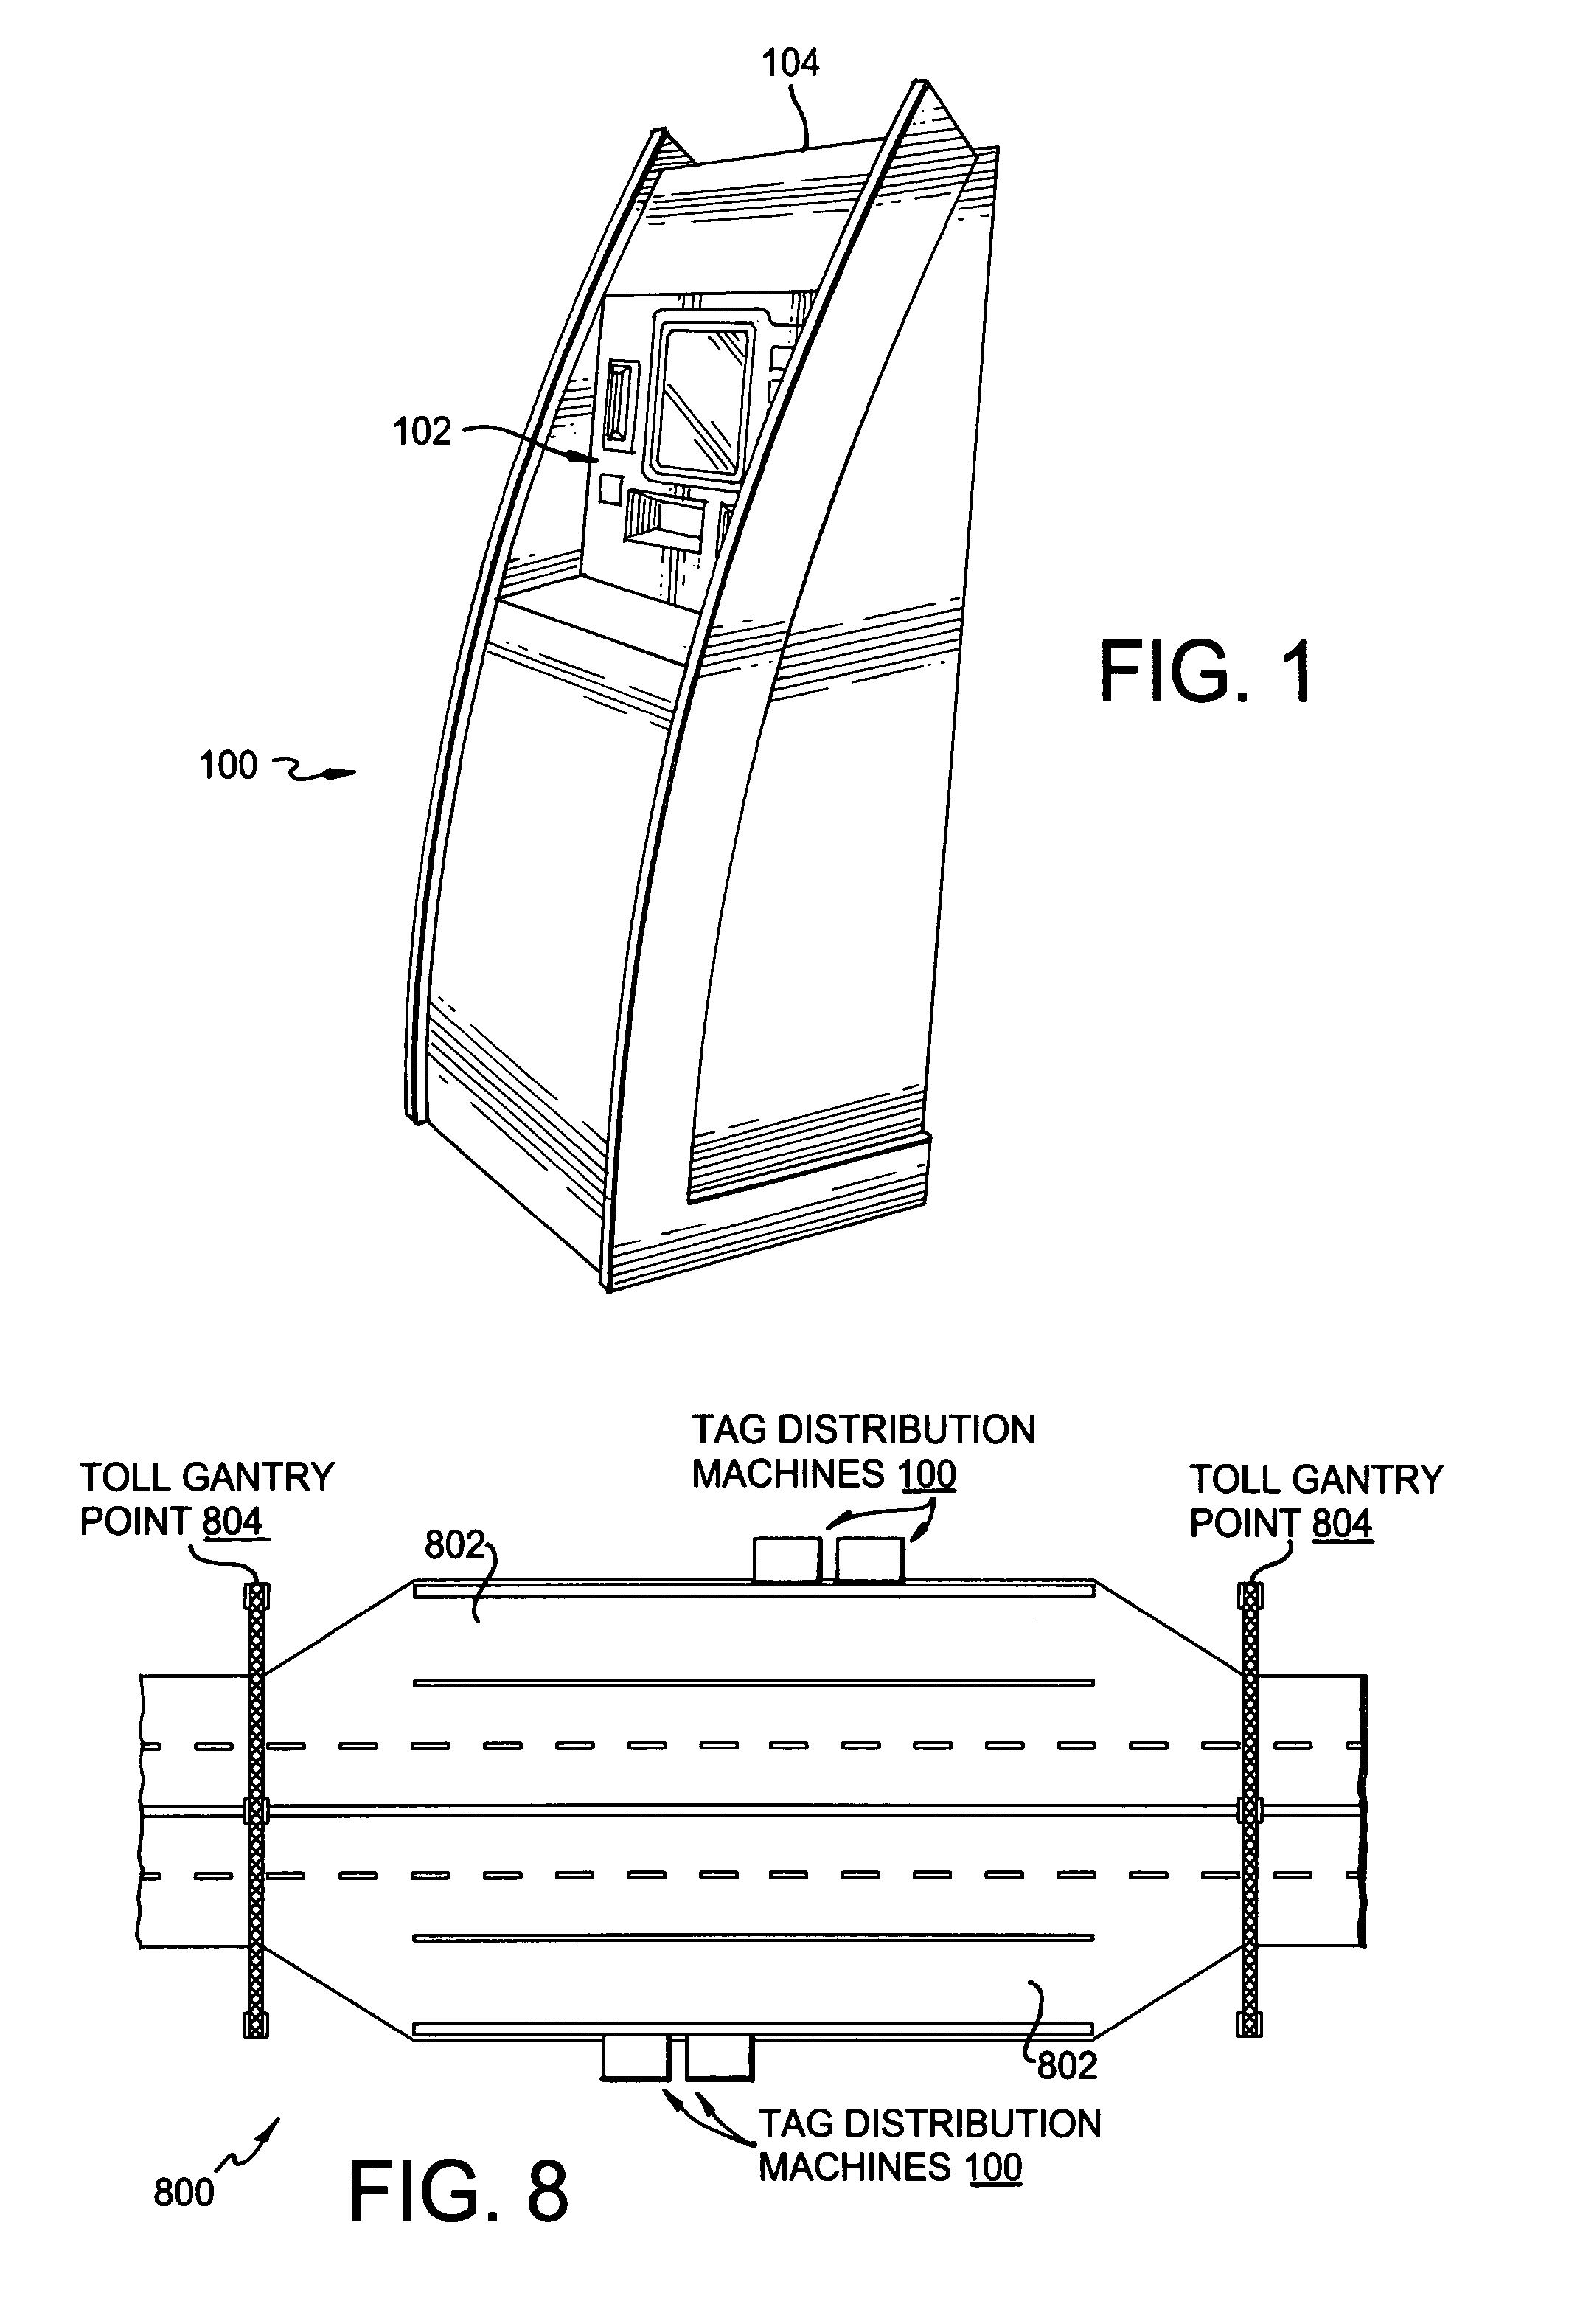 Method of enrolling in an electronic toll or payment collection system